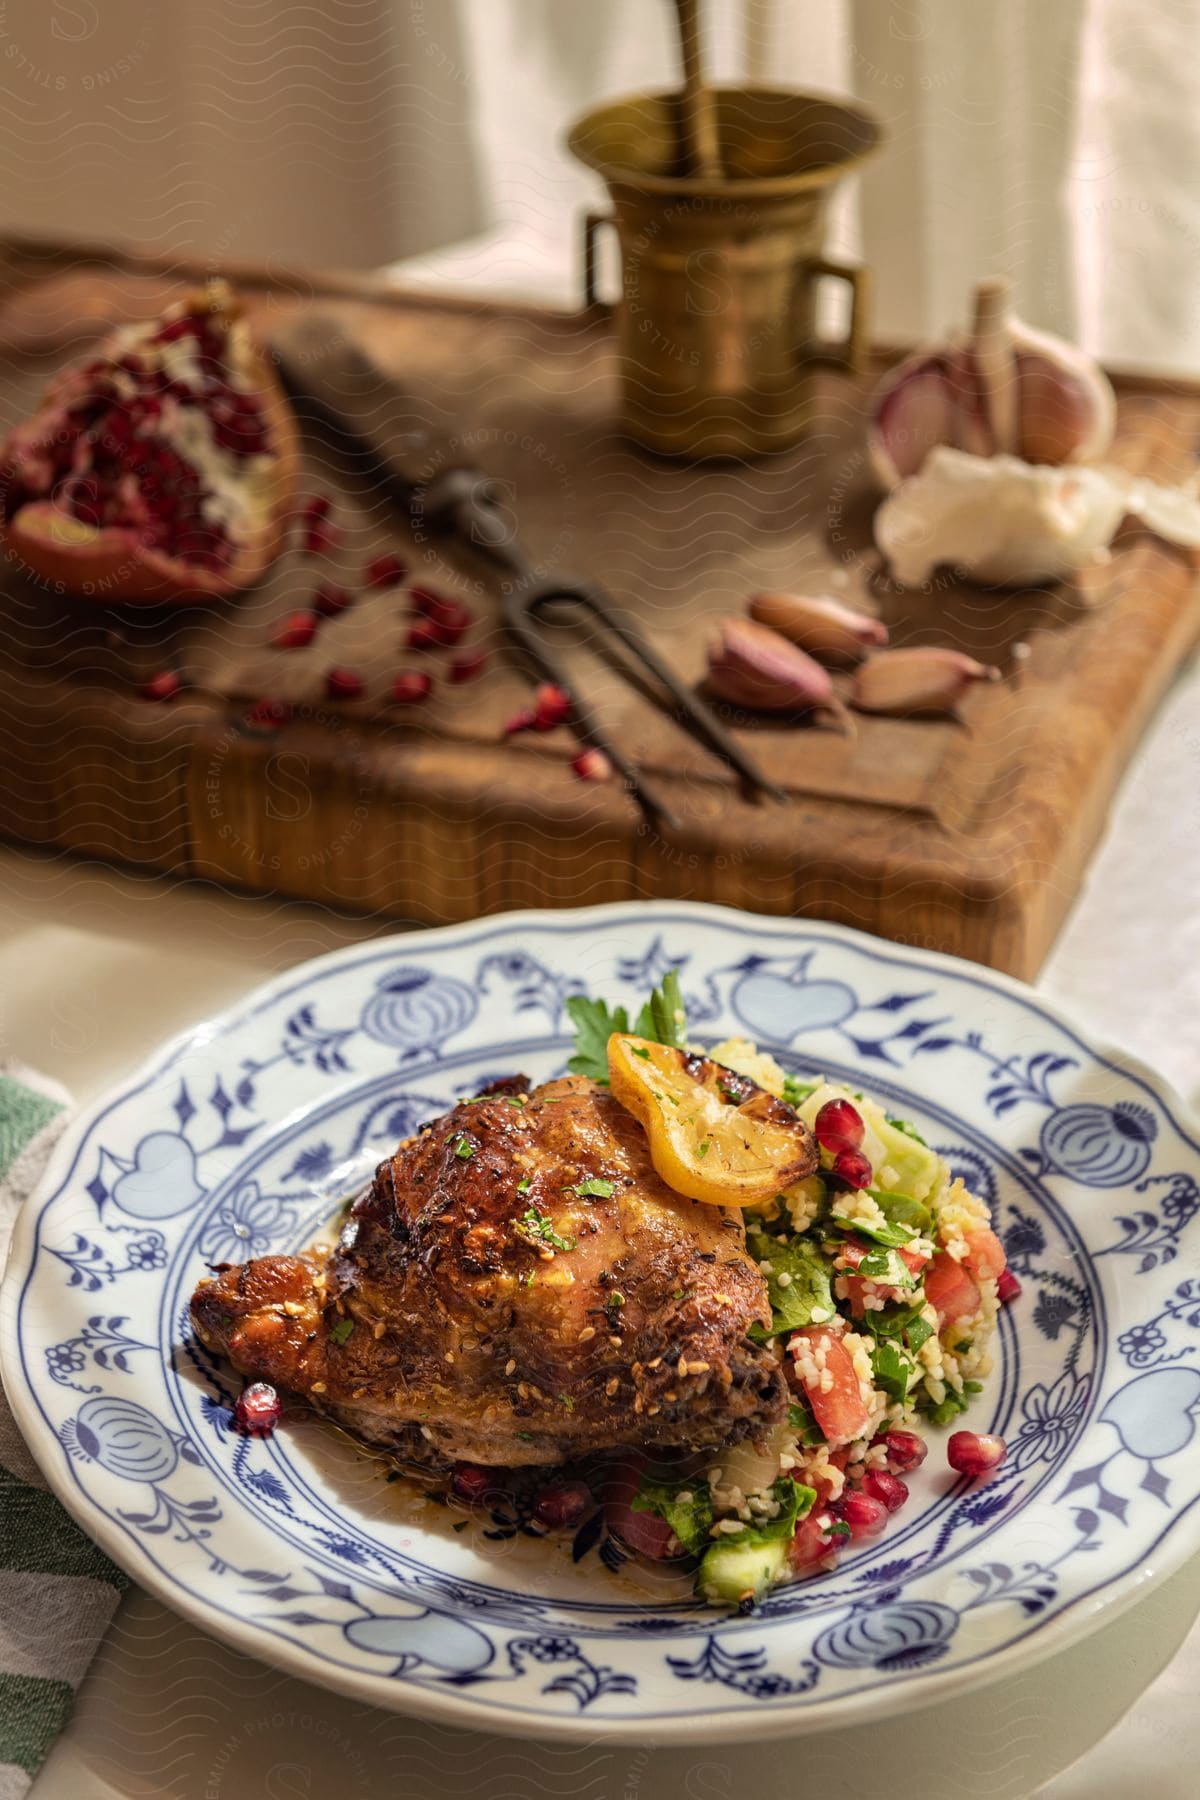 A plate of grilled chicken and salad, presented in a cozy, well-lit setting.